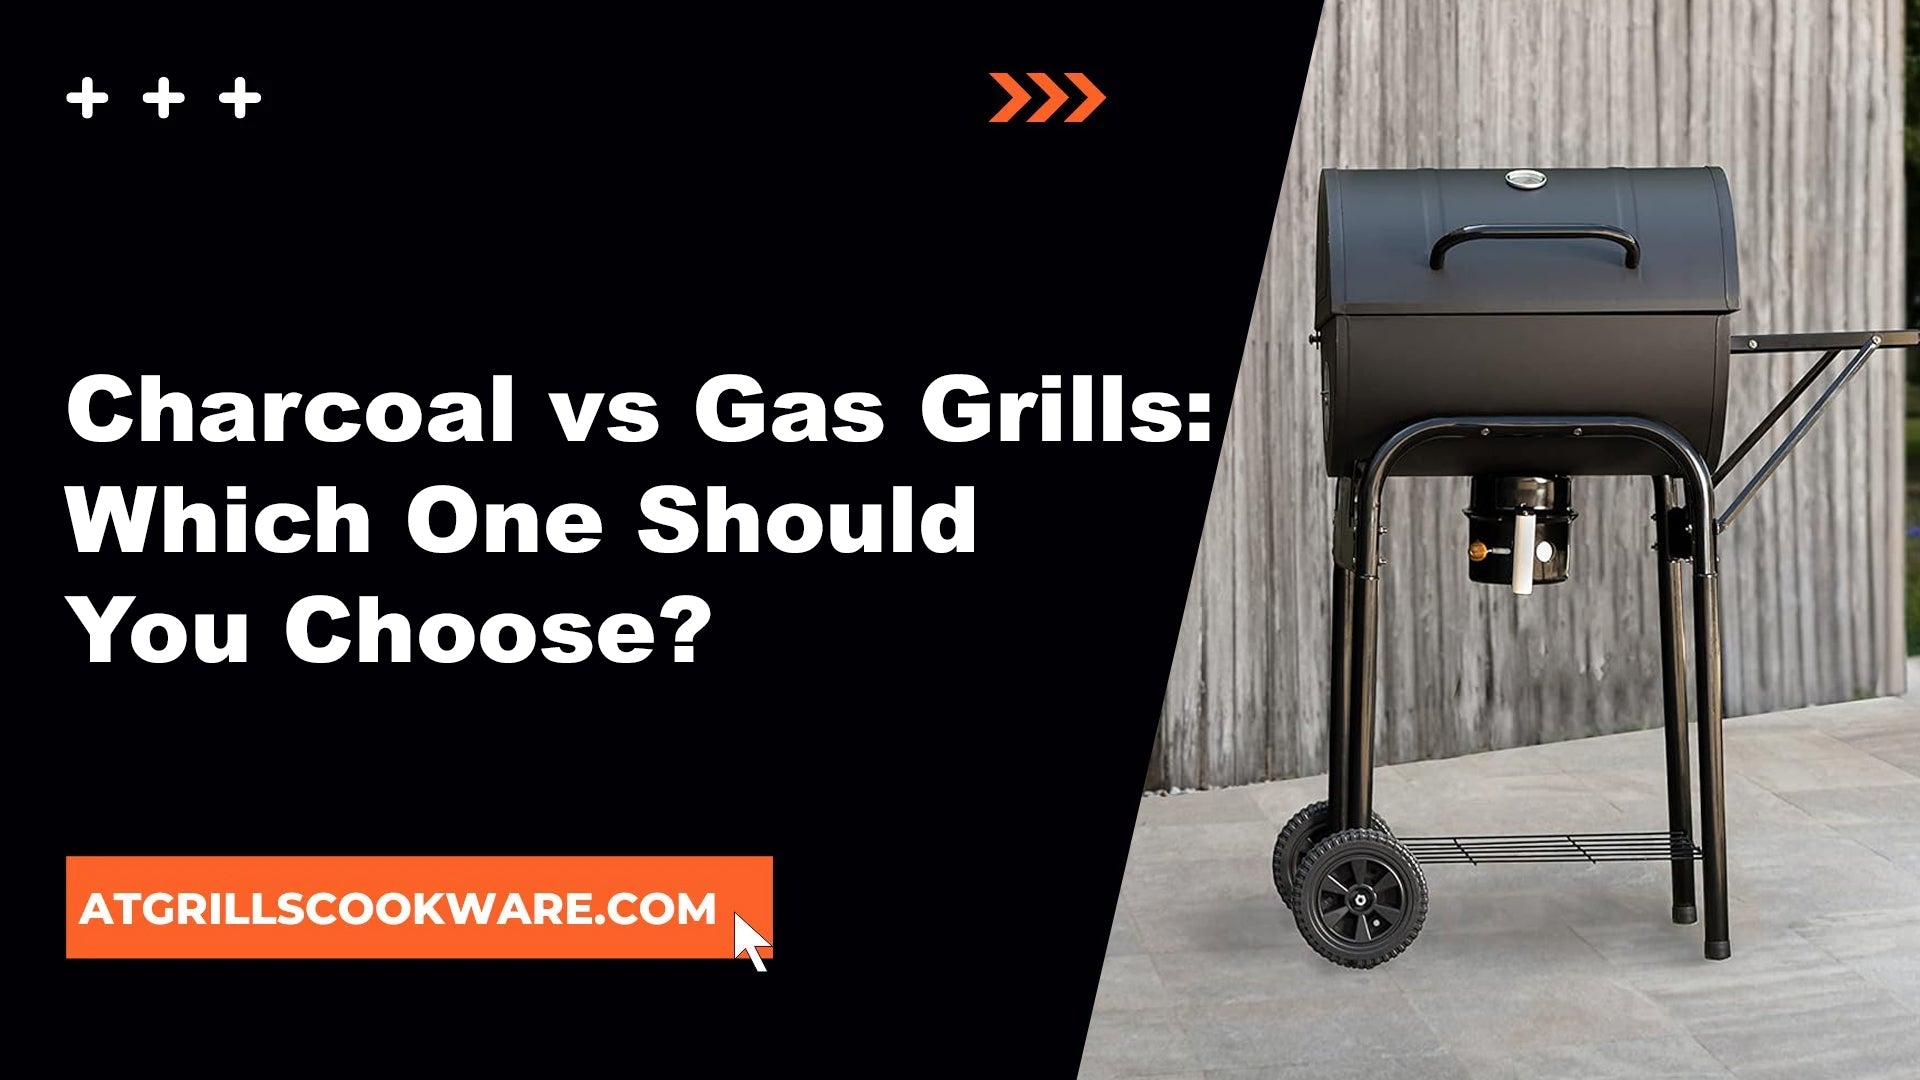 The Ultimate Barbecue Battle: Charcoal vs Gas Grills, Your Essential Guide